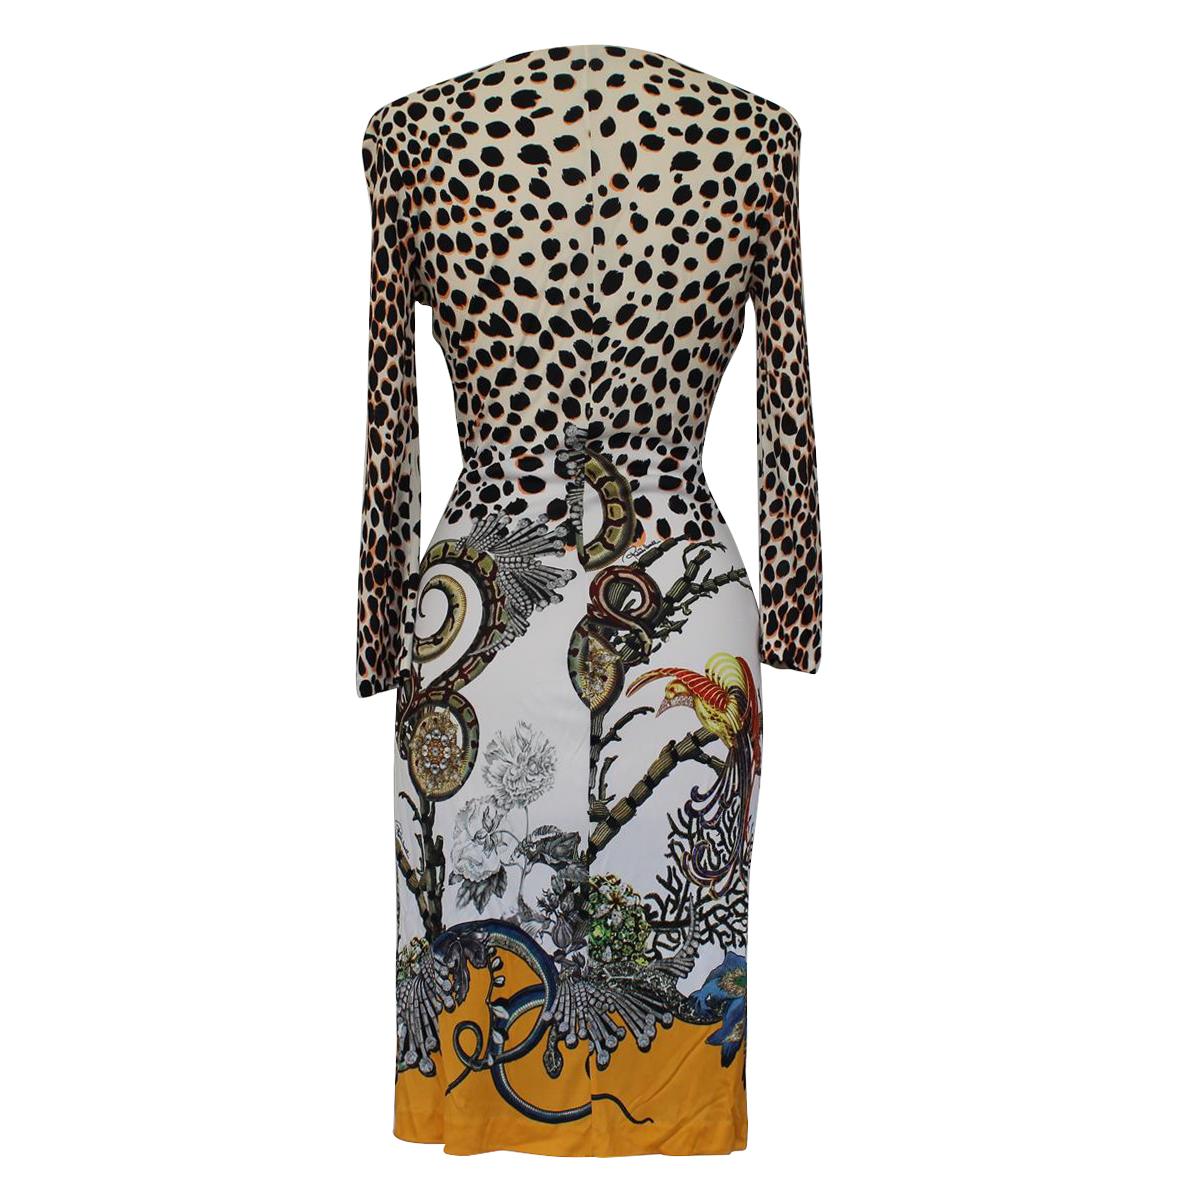 Beautiful Roberto Cavalli printed dress
Viscose
Fancy print with birds
Multicolored
Long sleeves
Total lenght (shoulder/hem) cm 100 (39.3 inches)
Shoulder cm 42 (16.5 inches)
Worldwide express shipping included in the price !